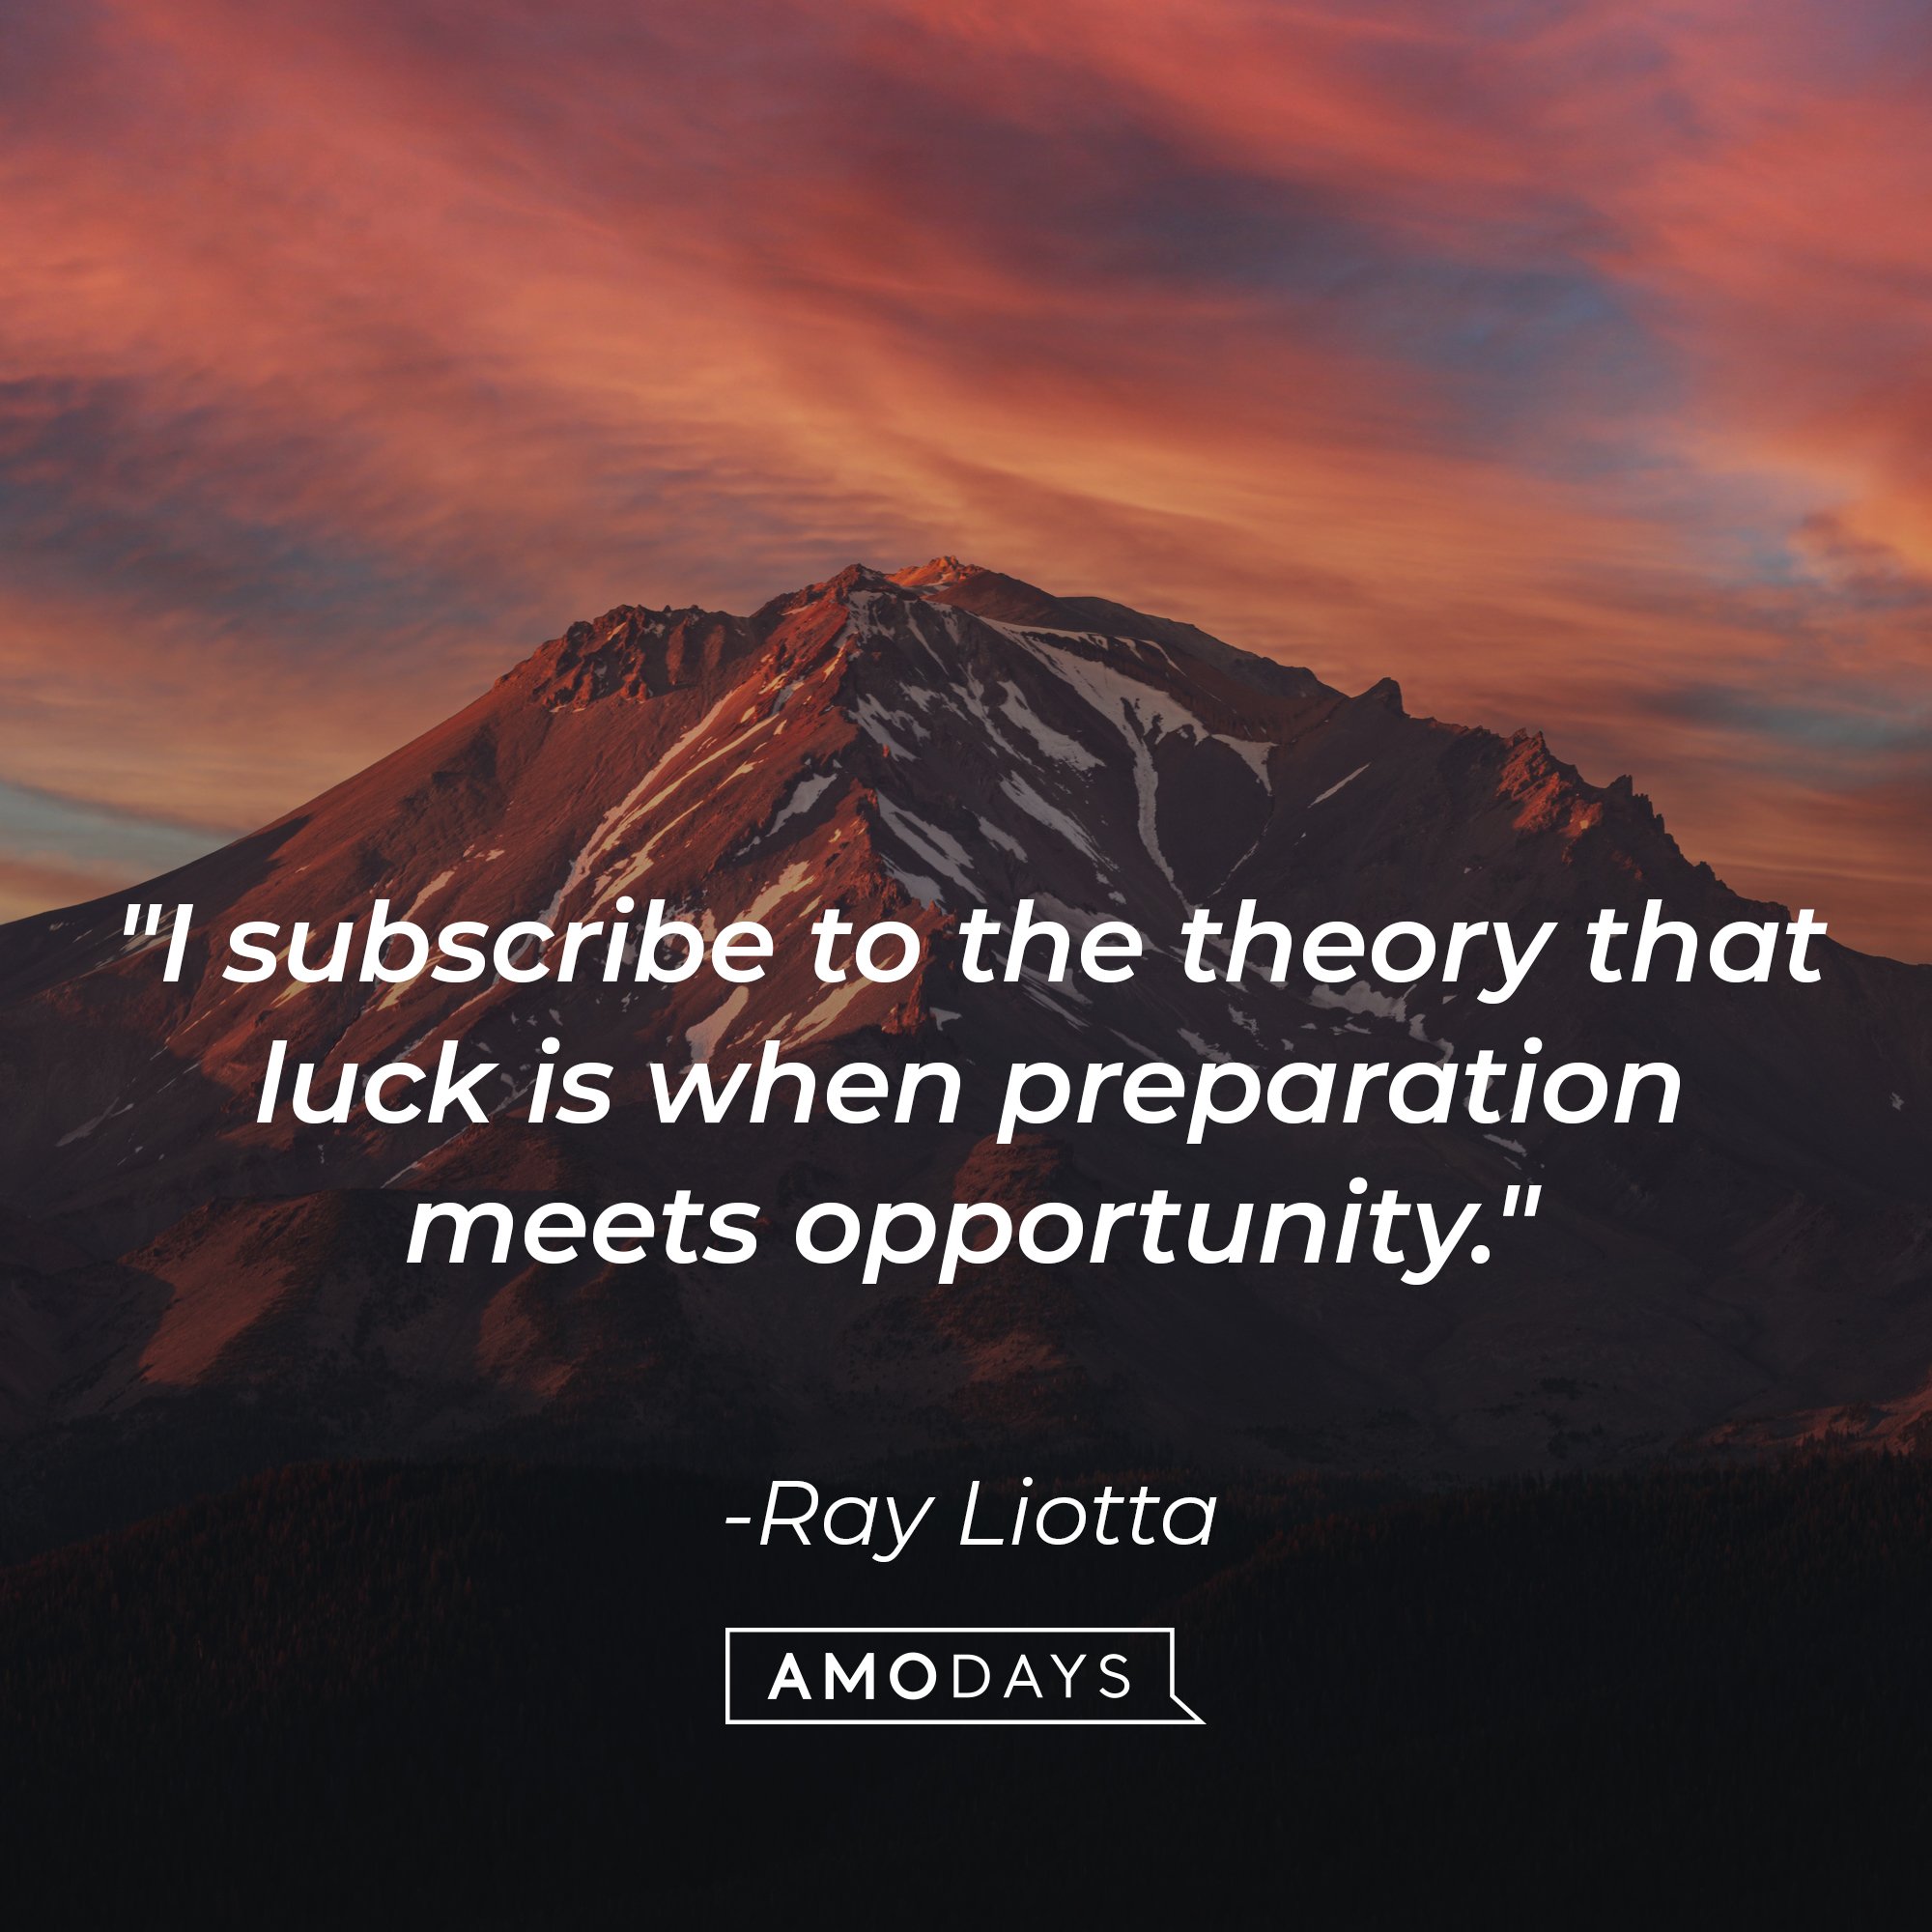 Ray Liotta’s quote: "I subscribe to the theory that luck is when preparation meets opportunity."  | Image: AmoDays